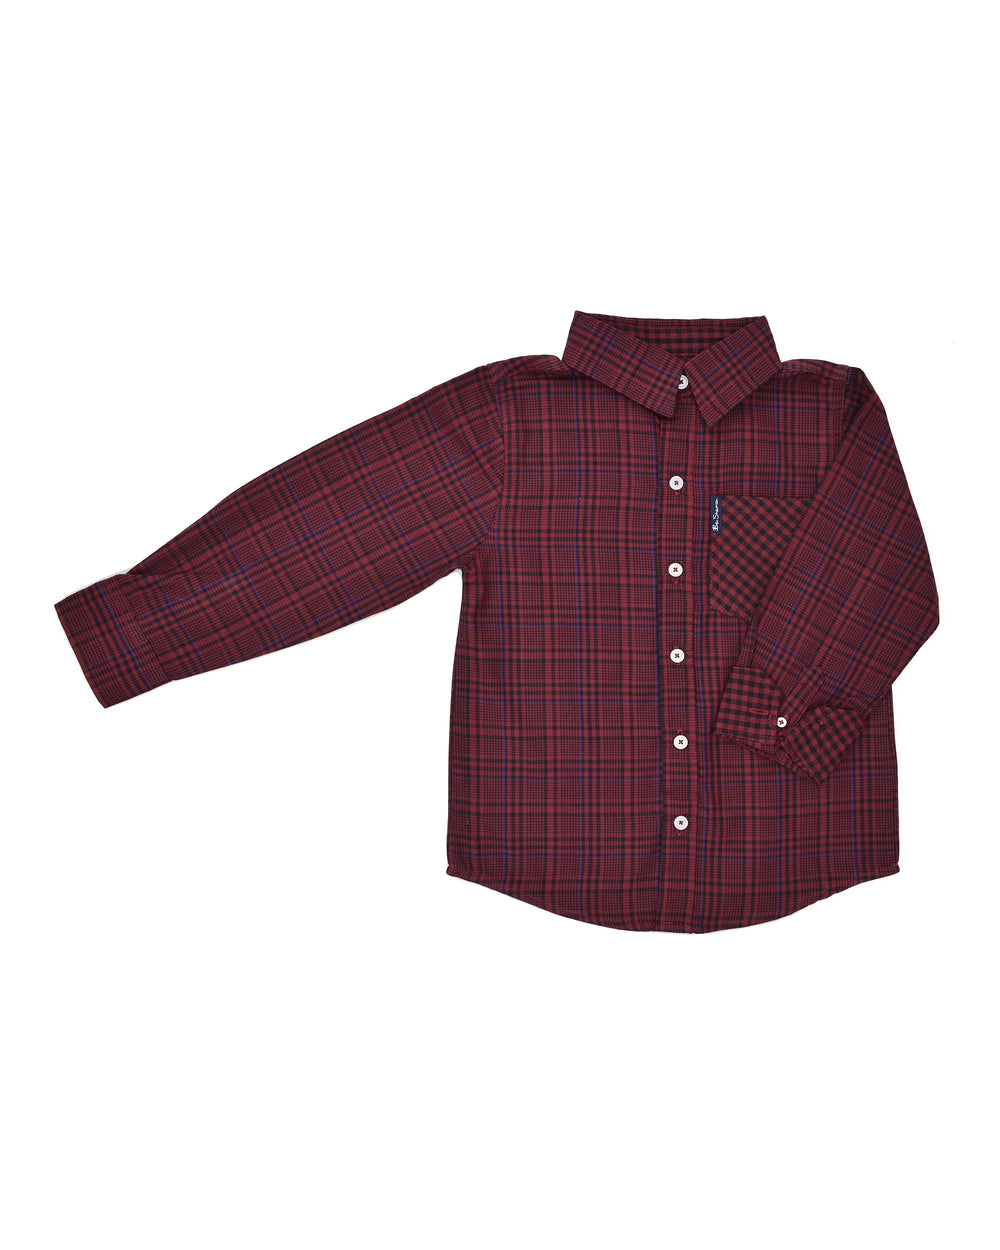 Boys' Red & Black Plaid with Blue Yarn Dyed Shirt (Sizes 4-7)